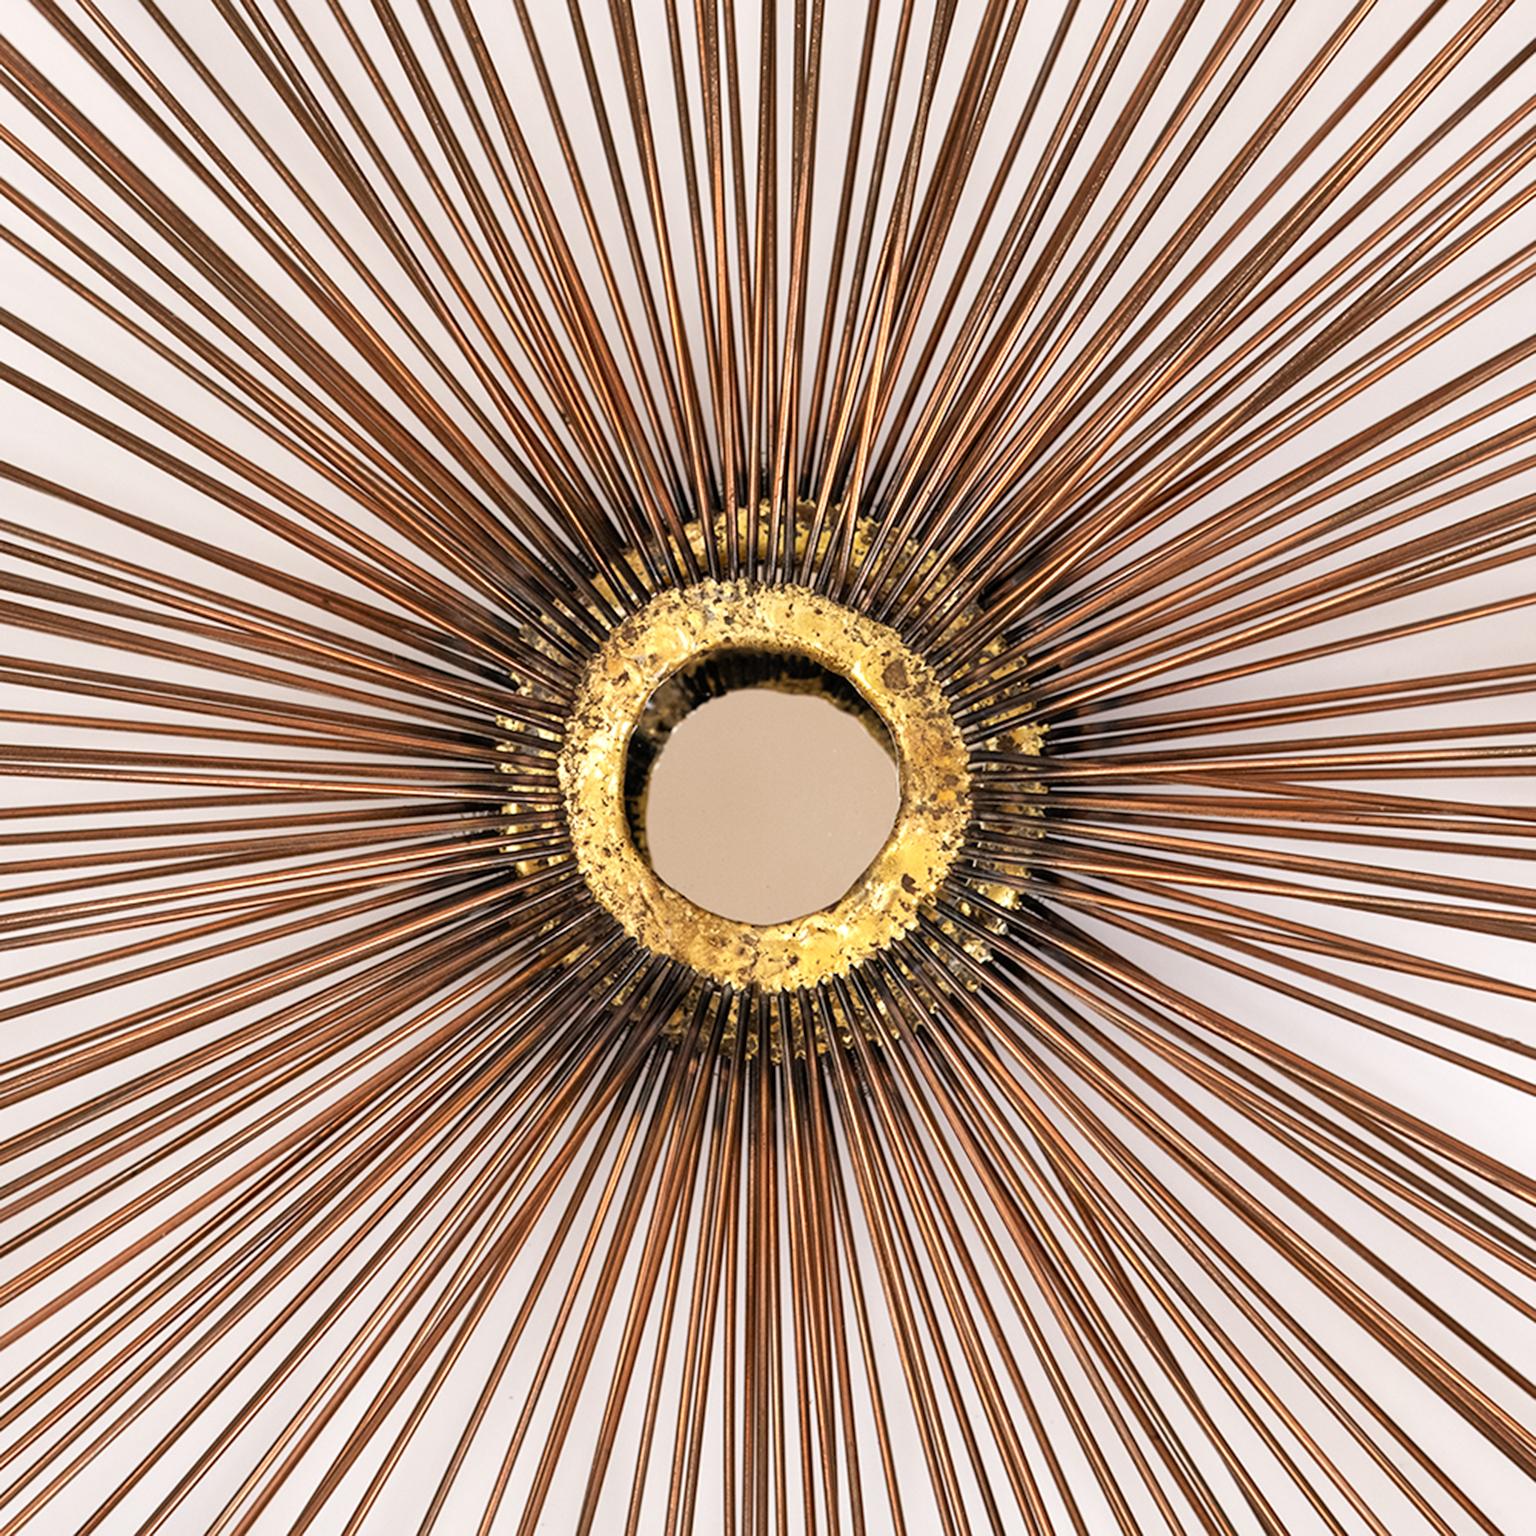 This is the largest sunburst/starburst wall art sculpture that I have had for sale. It is 40